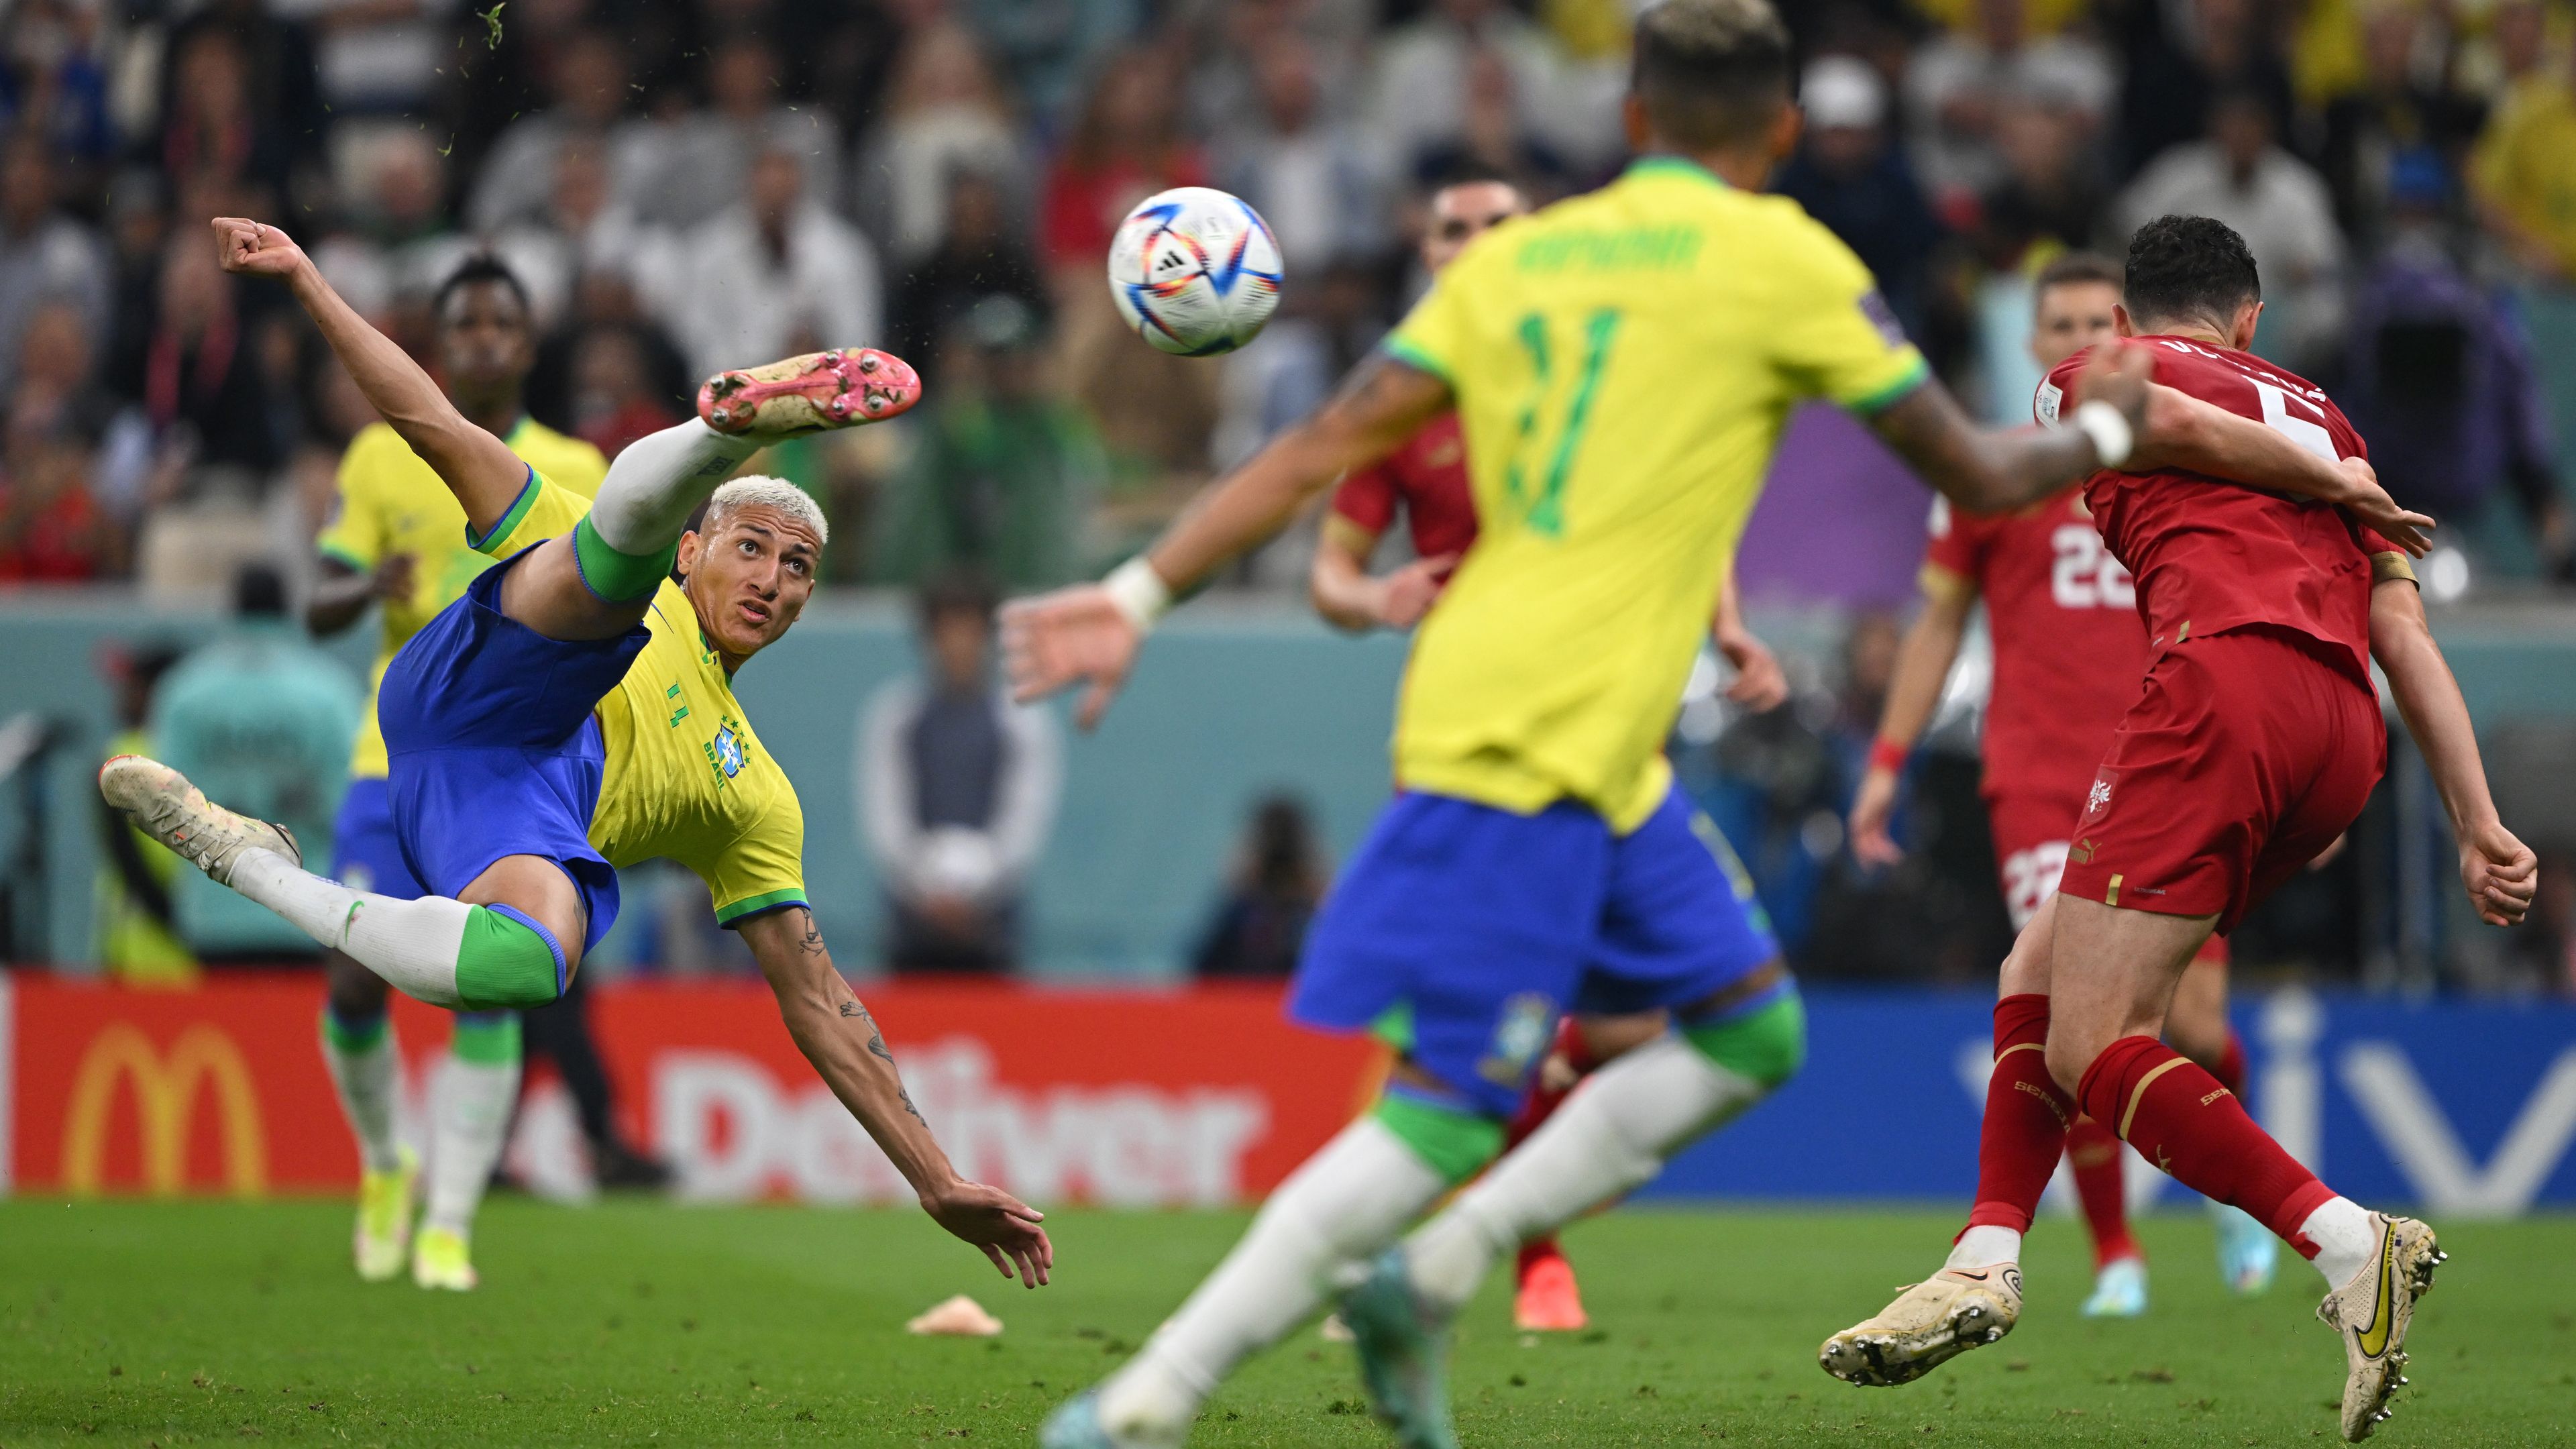 'Jaw still on the floor' as Brazil's Richarlison scores 'insane' World Cup goal to spark win over Serbia